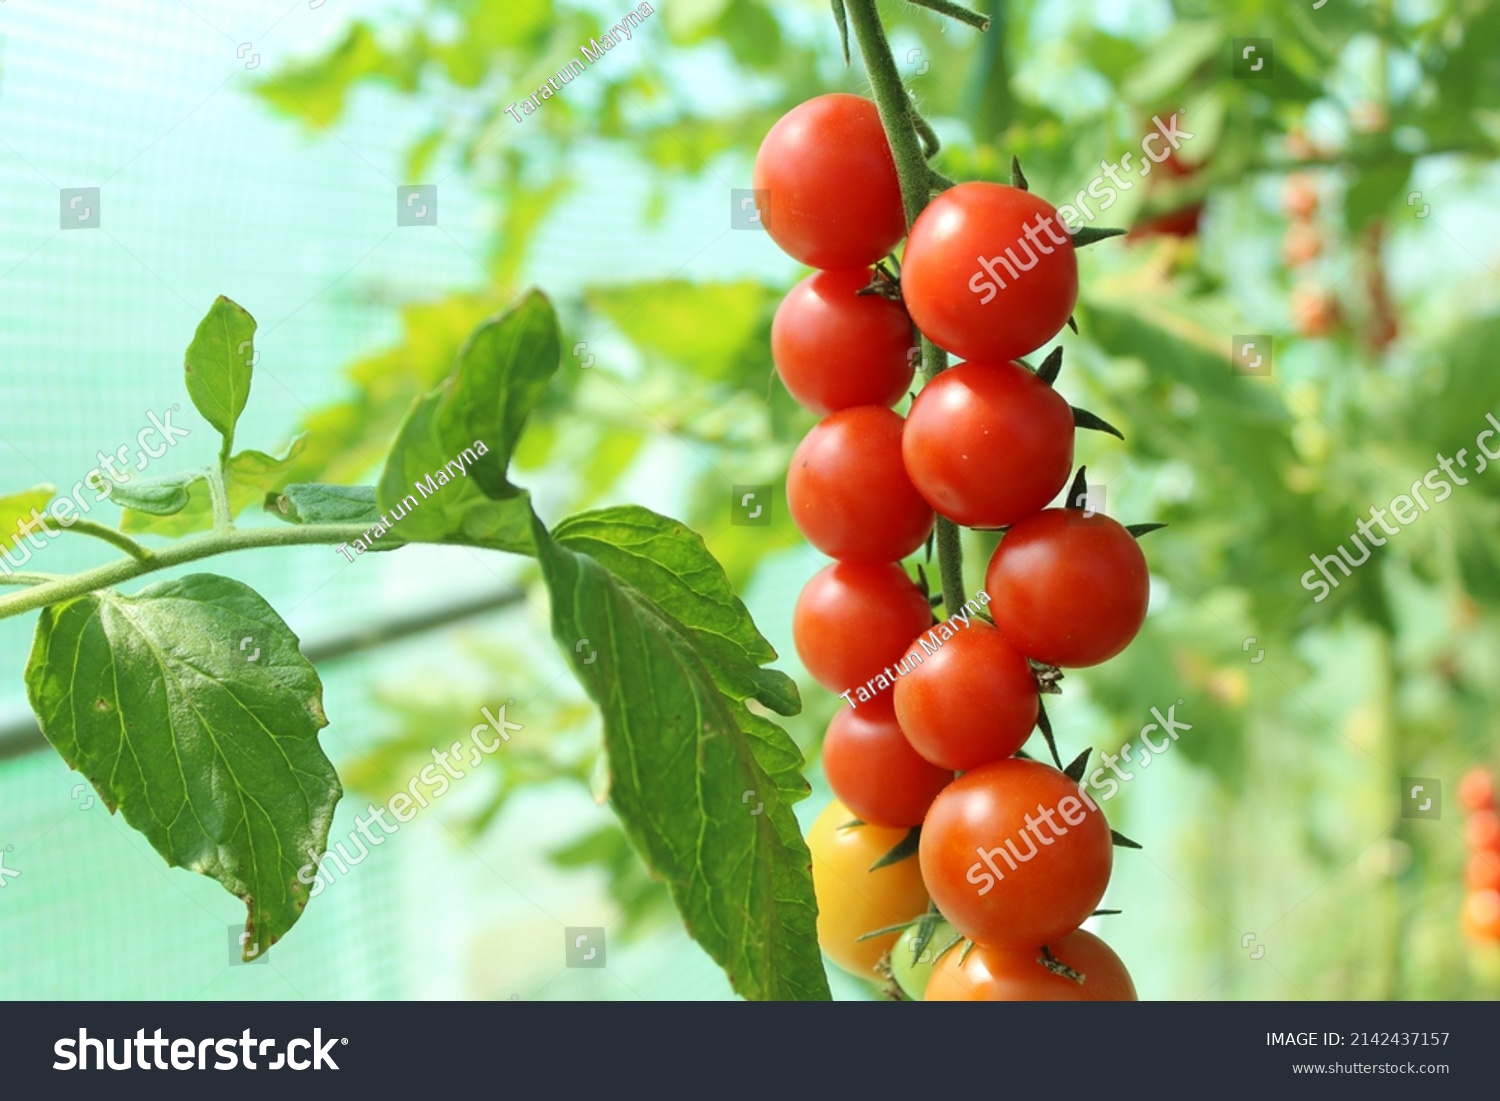 Tomato, branch with tomatoes. Harvest of small red cherry tomatoes. ripe tomato #2142437157